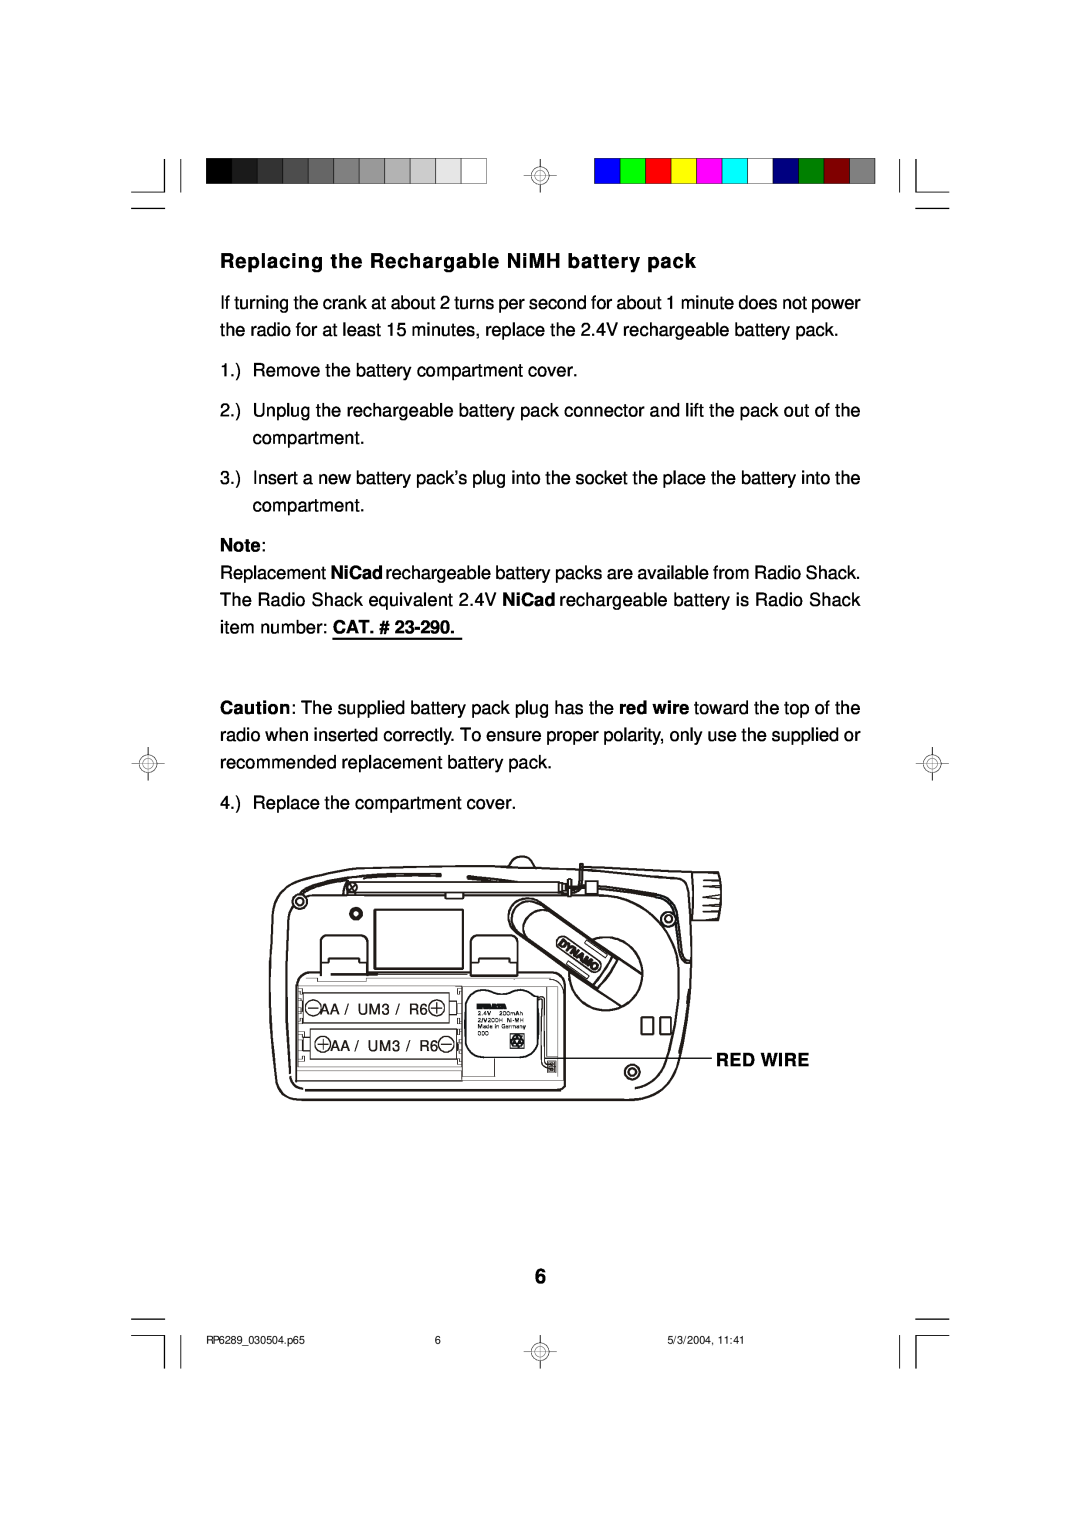 Emerson RP6289 owner manual Replacing the Rechargable NiMH battery pack, Red Wire 